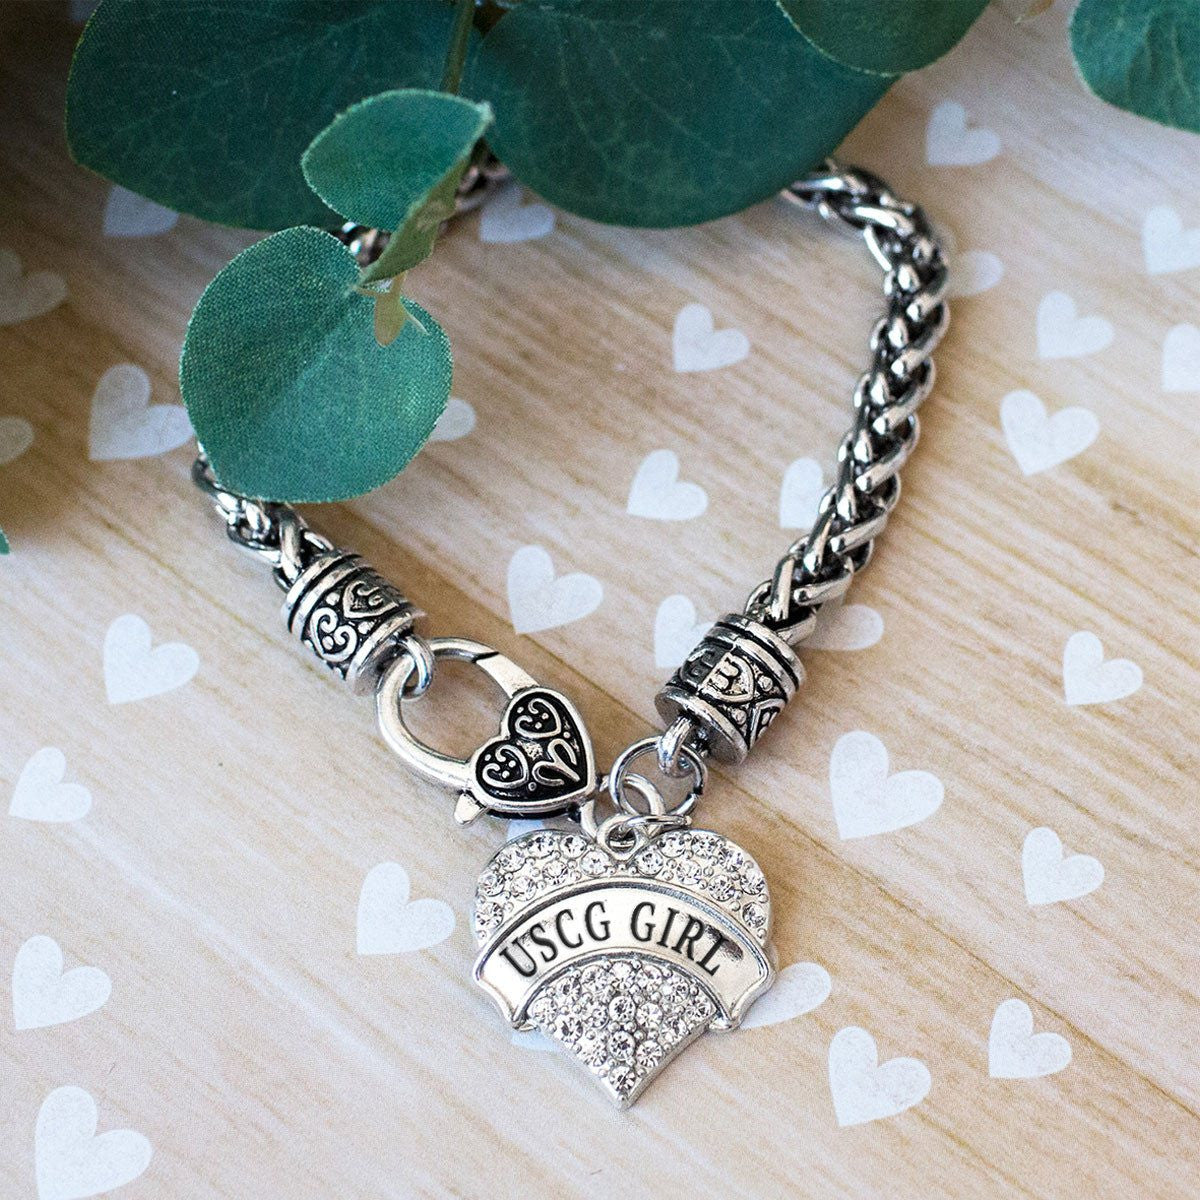 USCG Girl Charm Jewelry Collection